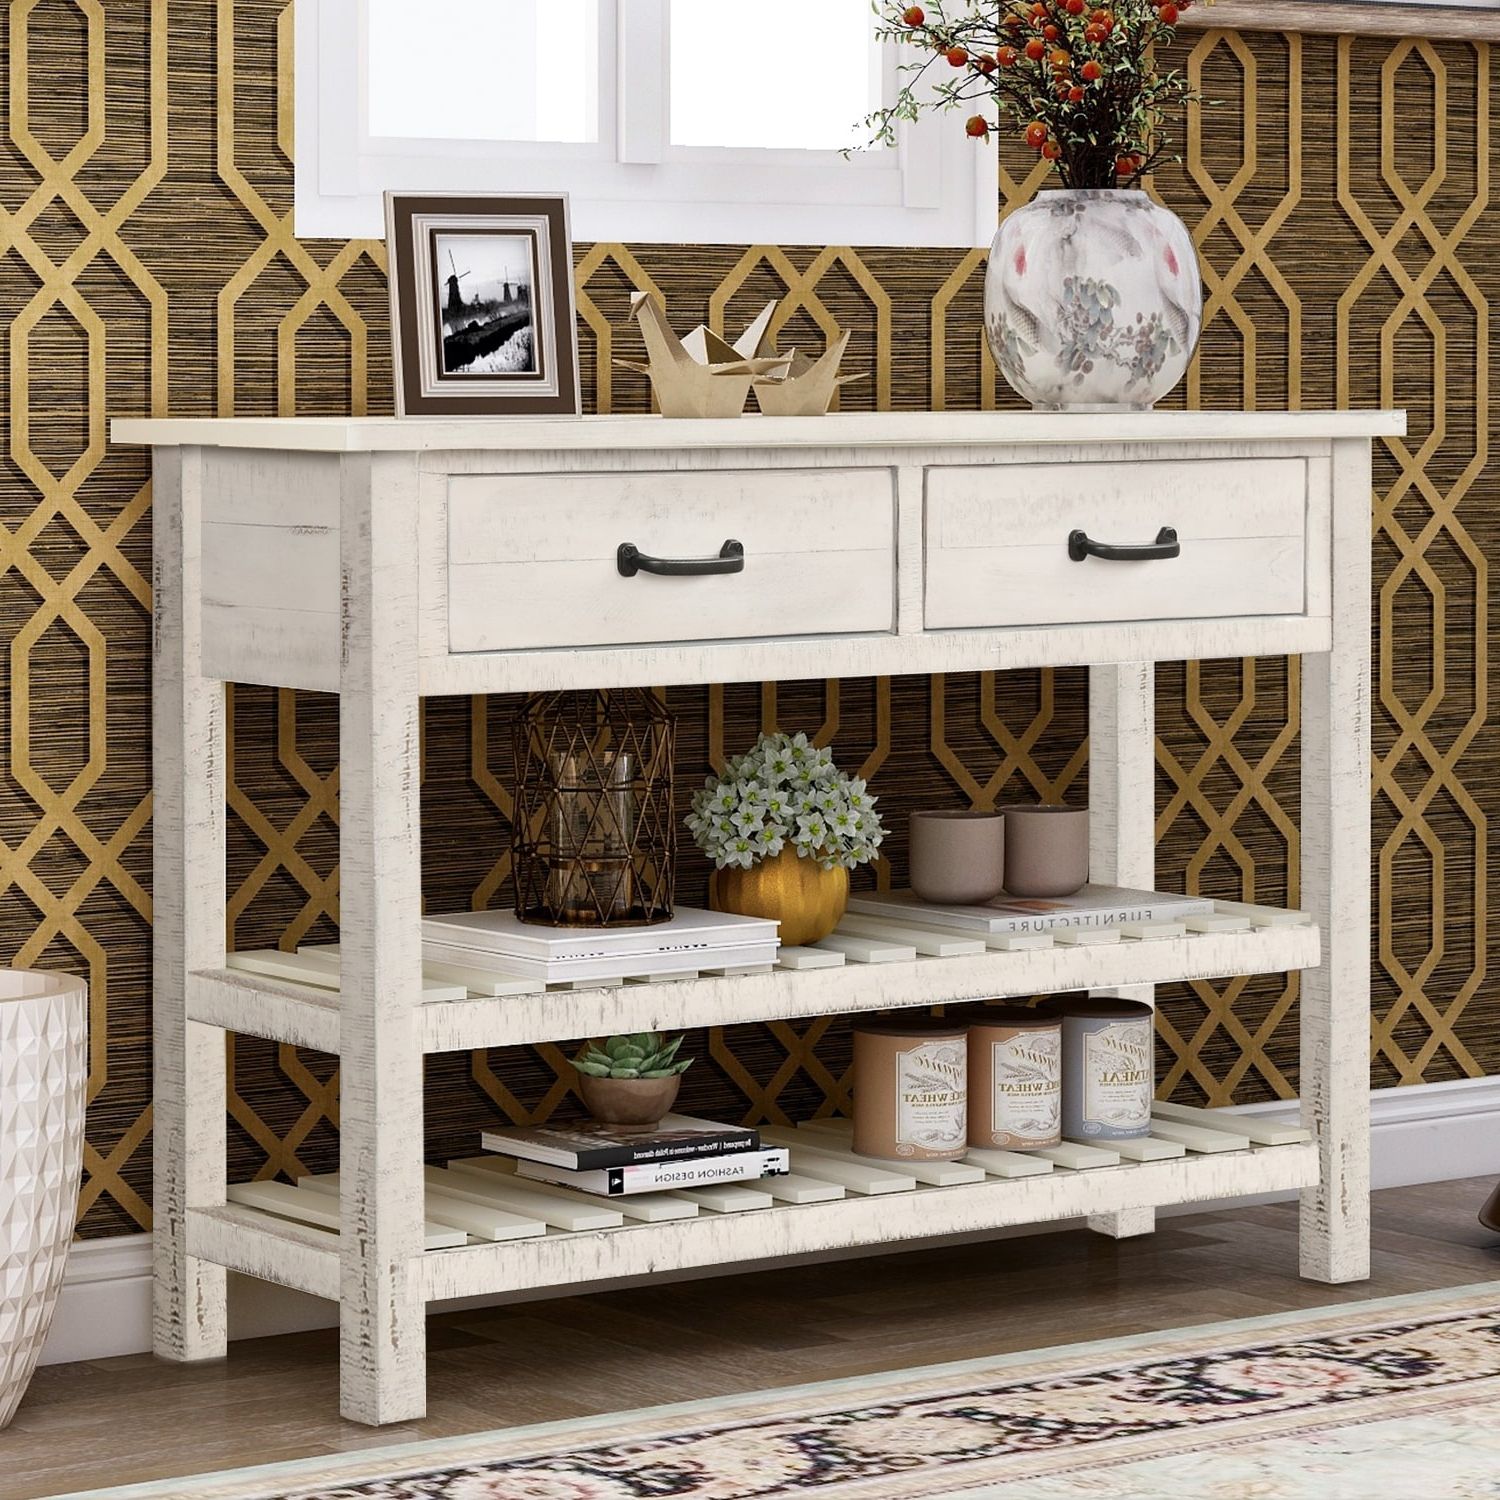 Most Recent Entry Console Sideboards Regarding Retro Console Table Sideboard Cabinet For Entryway With 2 Drawers And 2  Slatted Bottom Shelves, Antique White – Bed Bath & Beyond – 34861028 (Photo 6 of 15)